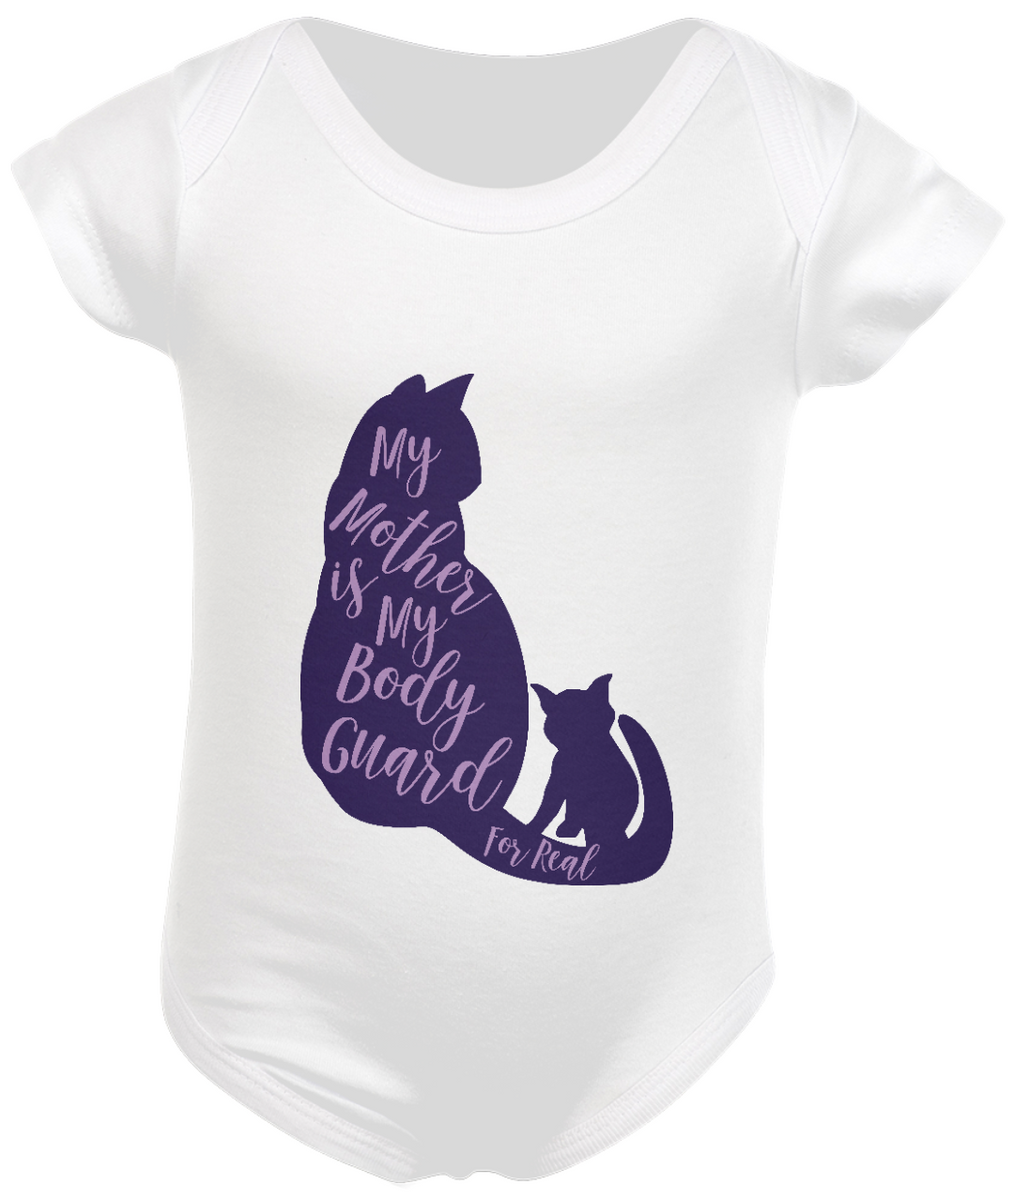 Nome do produto: Body Infantil Estampa Gato Frase My Mother is My Body Guard for Real